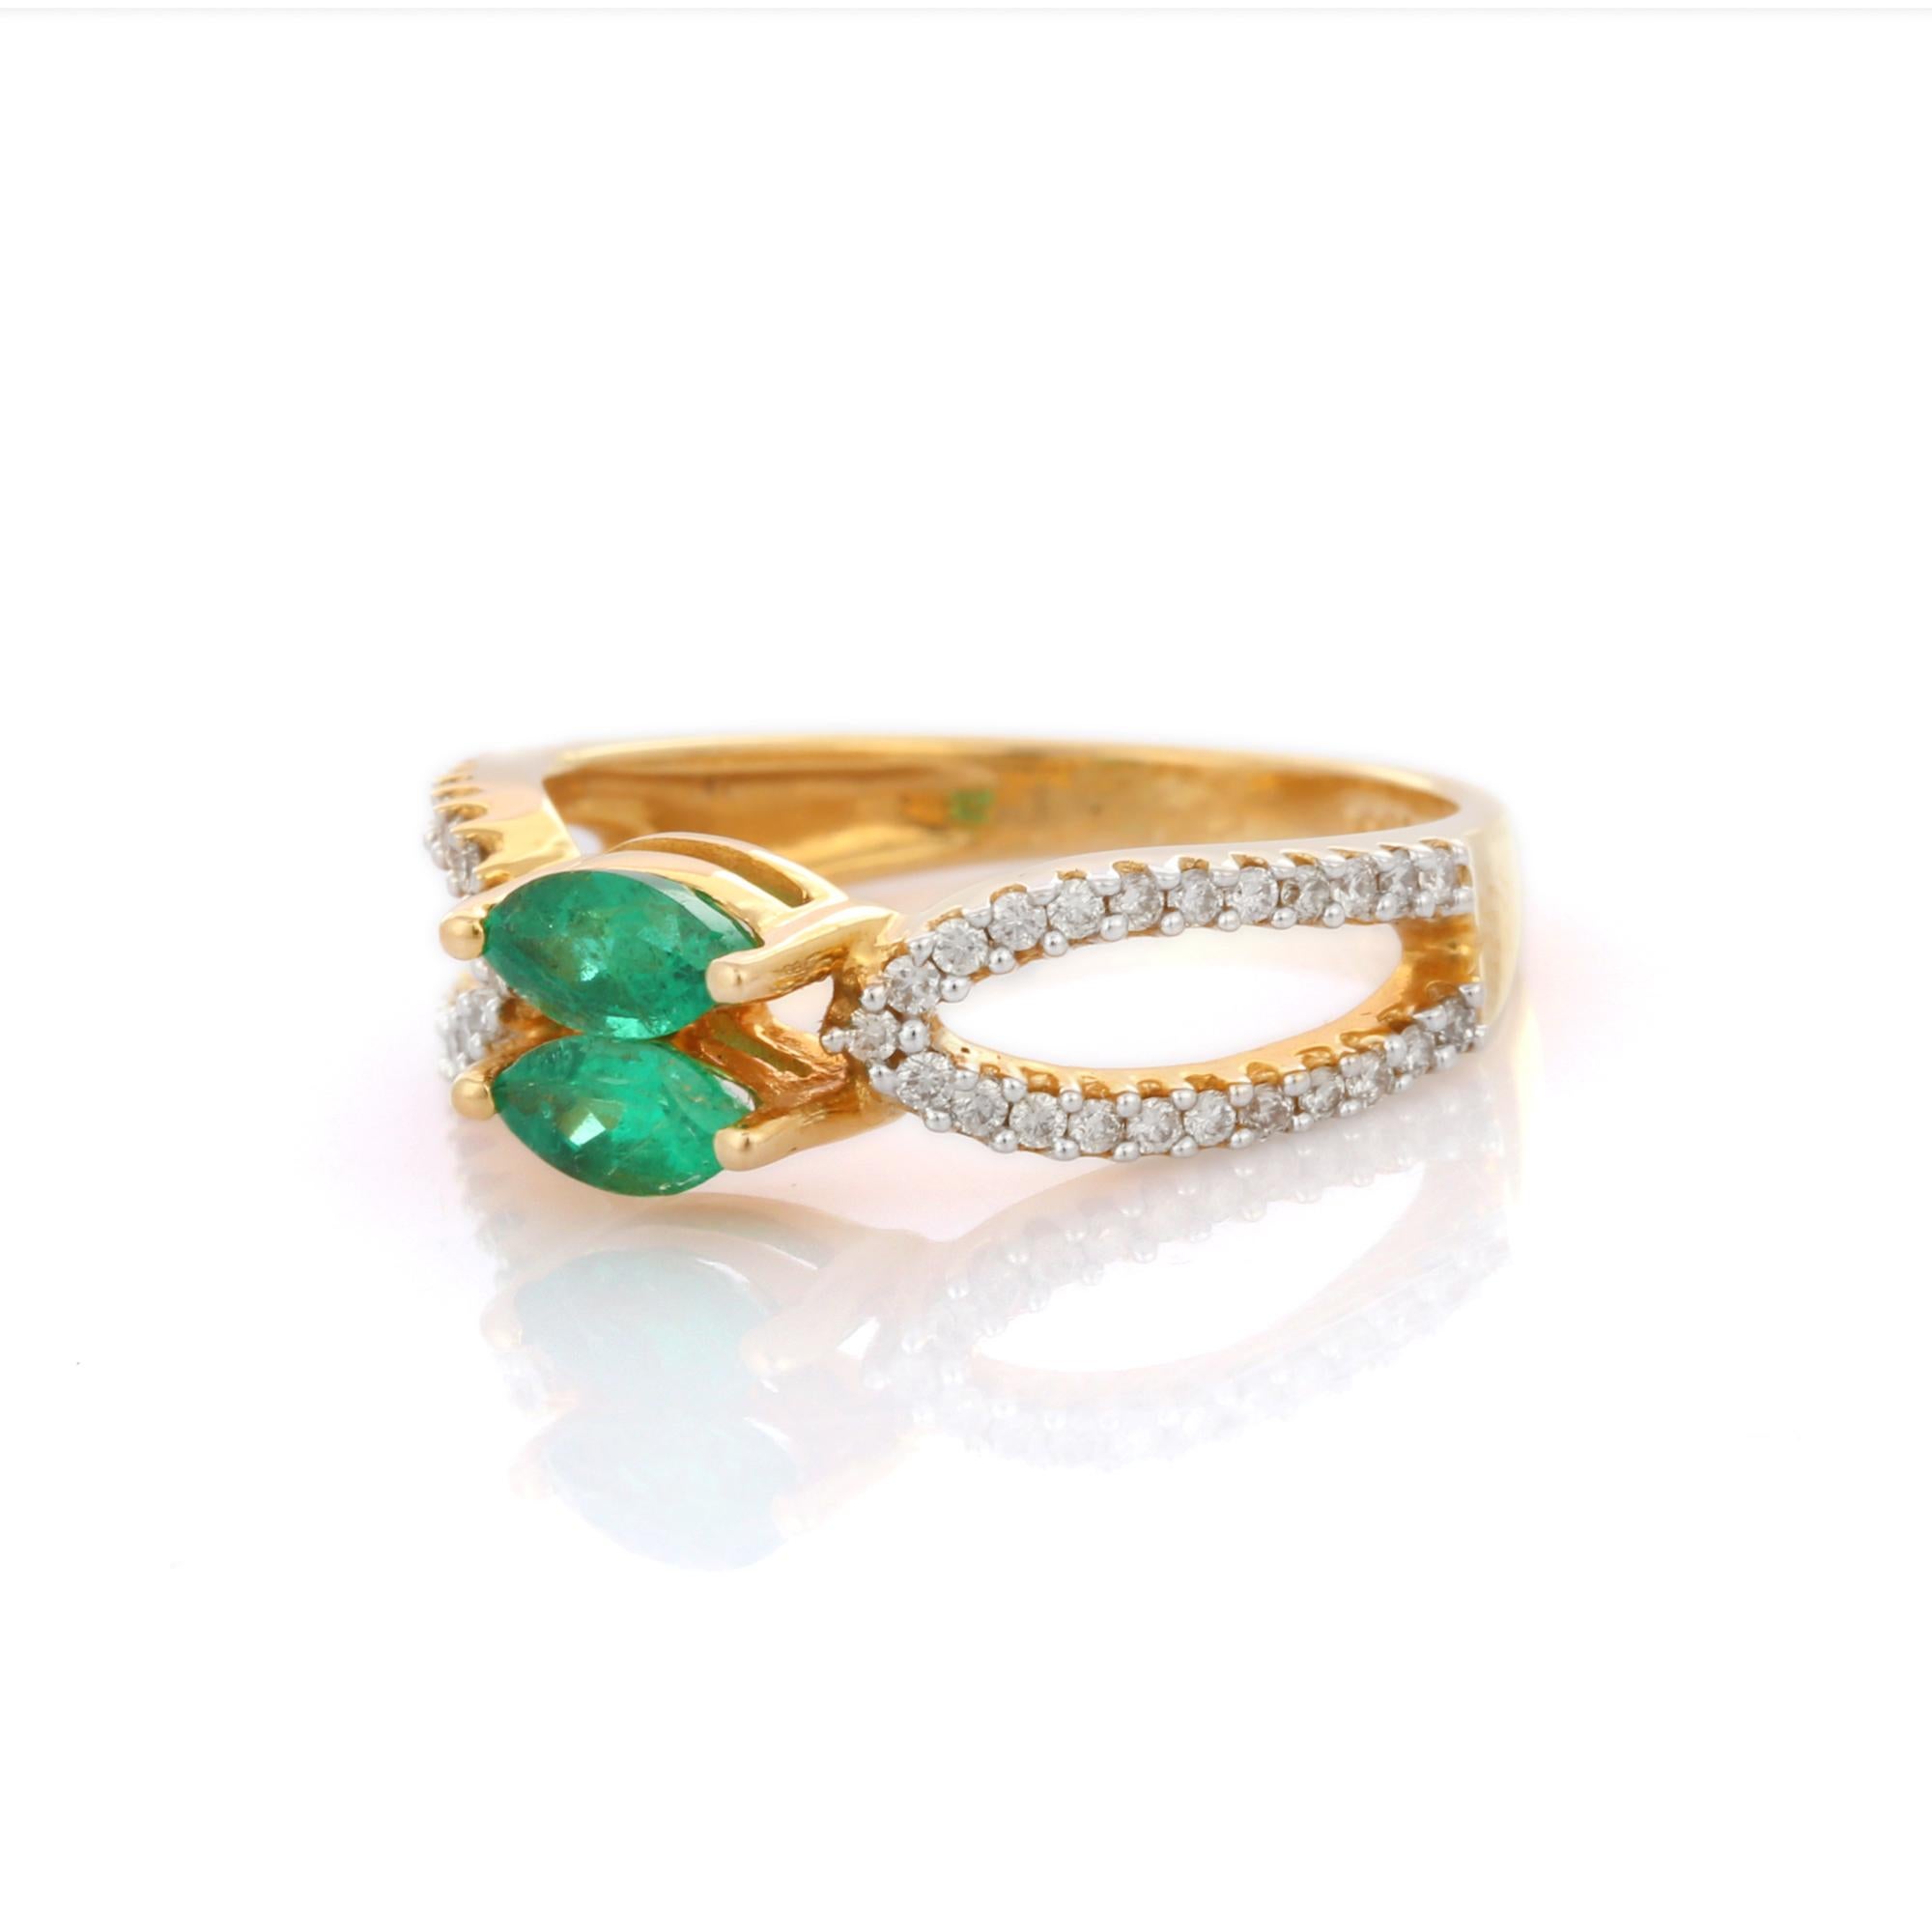 For Sale:  Emerald Ring, Diamond Emerald Wedding Ring in 18K Yellow Gold 3